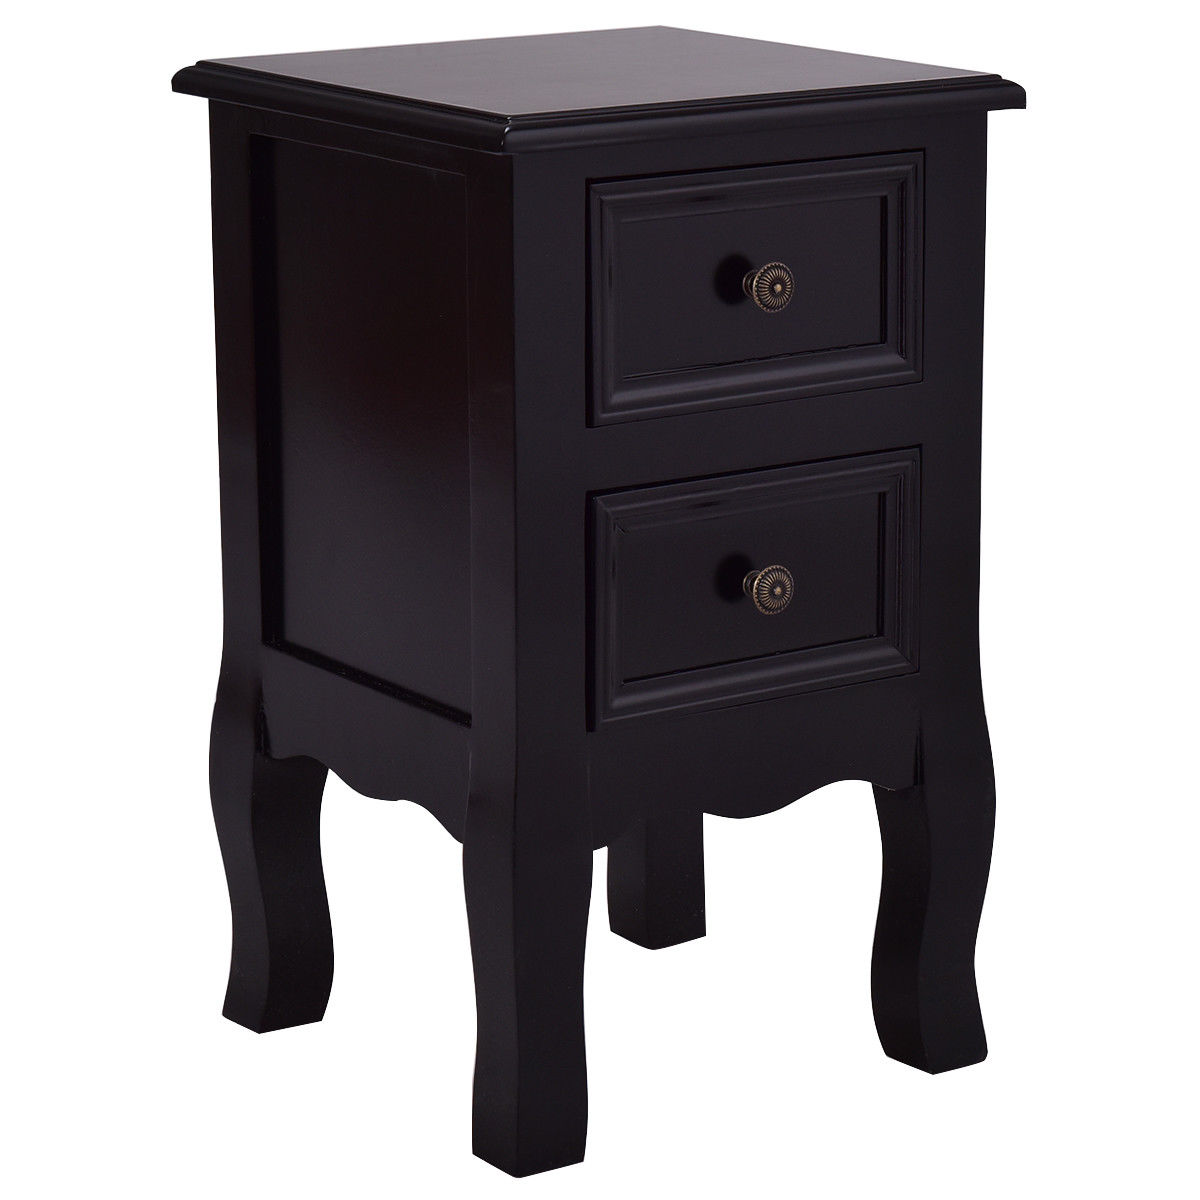 way black night stand storage drawers wood end accent table with farm door ikea living room chairs turquoise coffee home furnishing items tree stump side sofa outdoor glass white